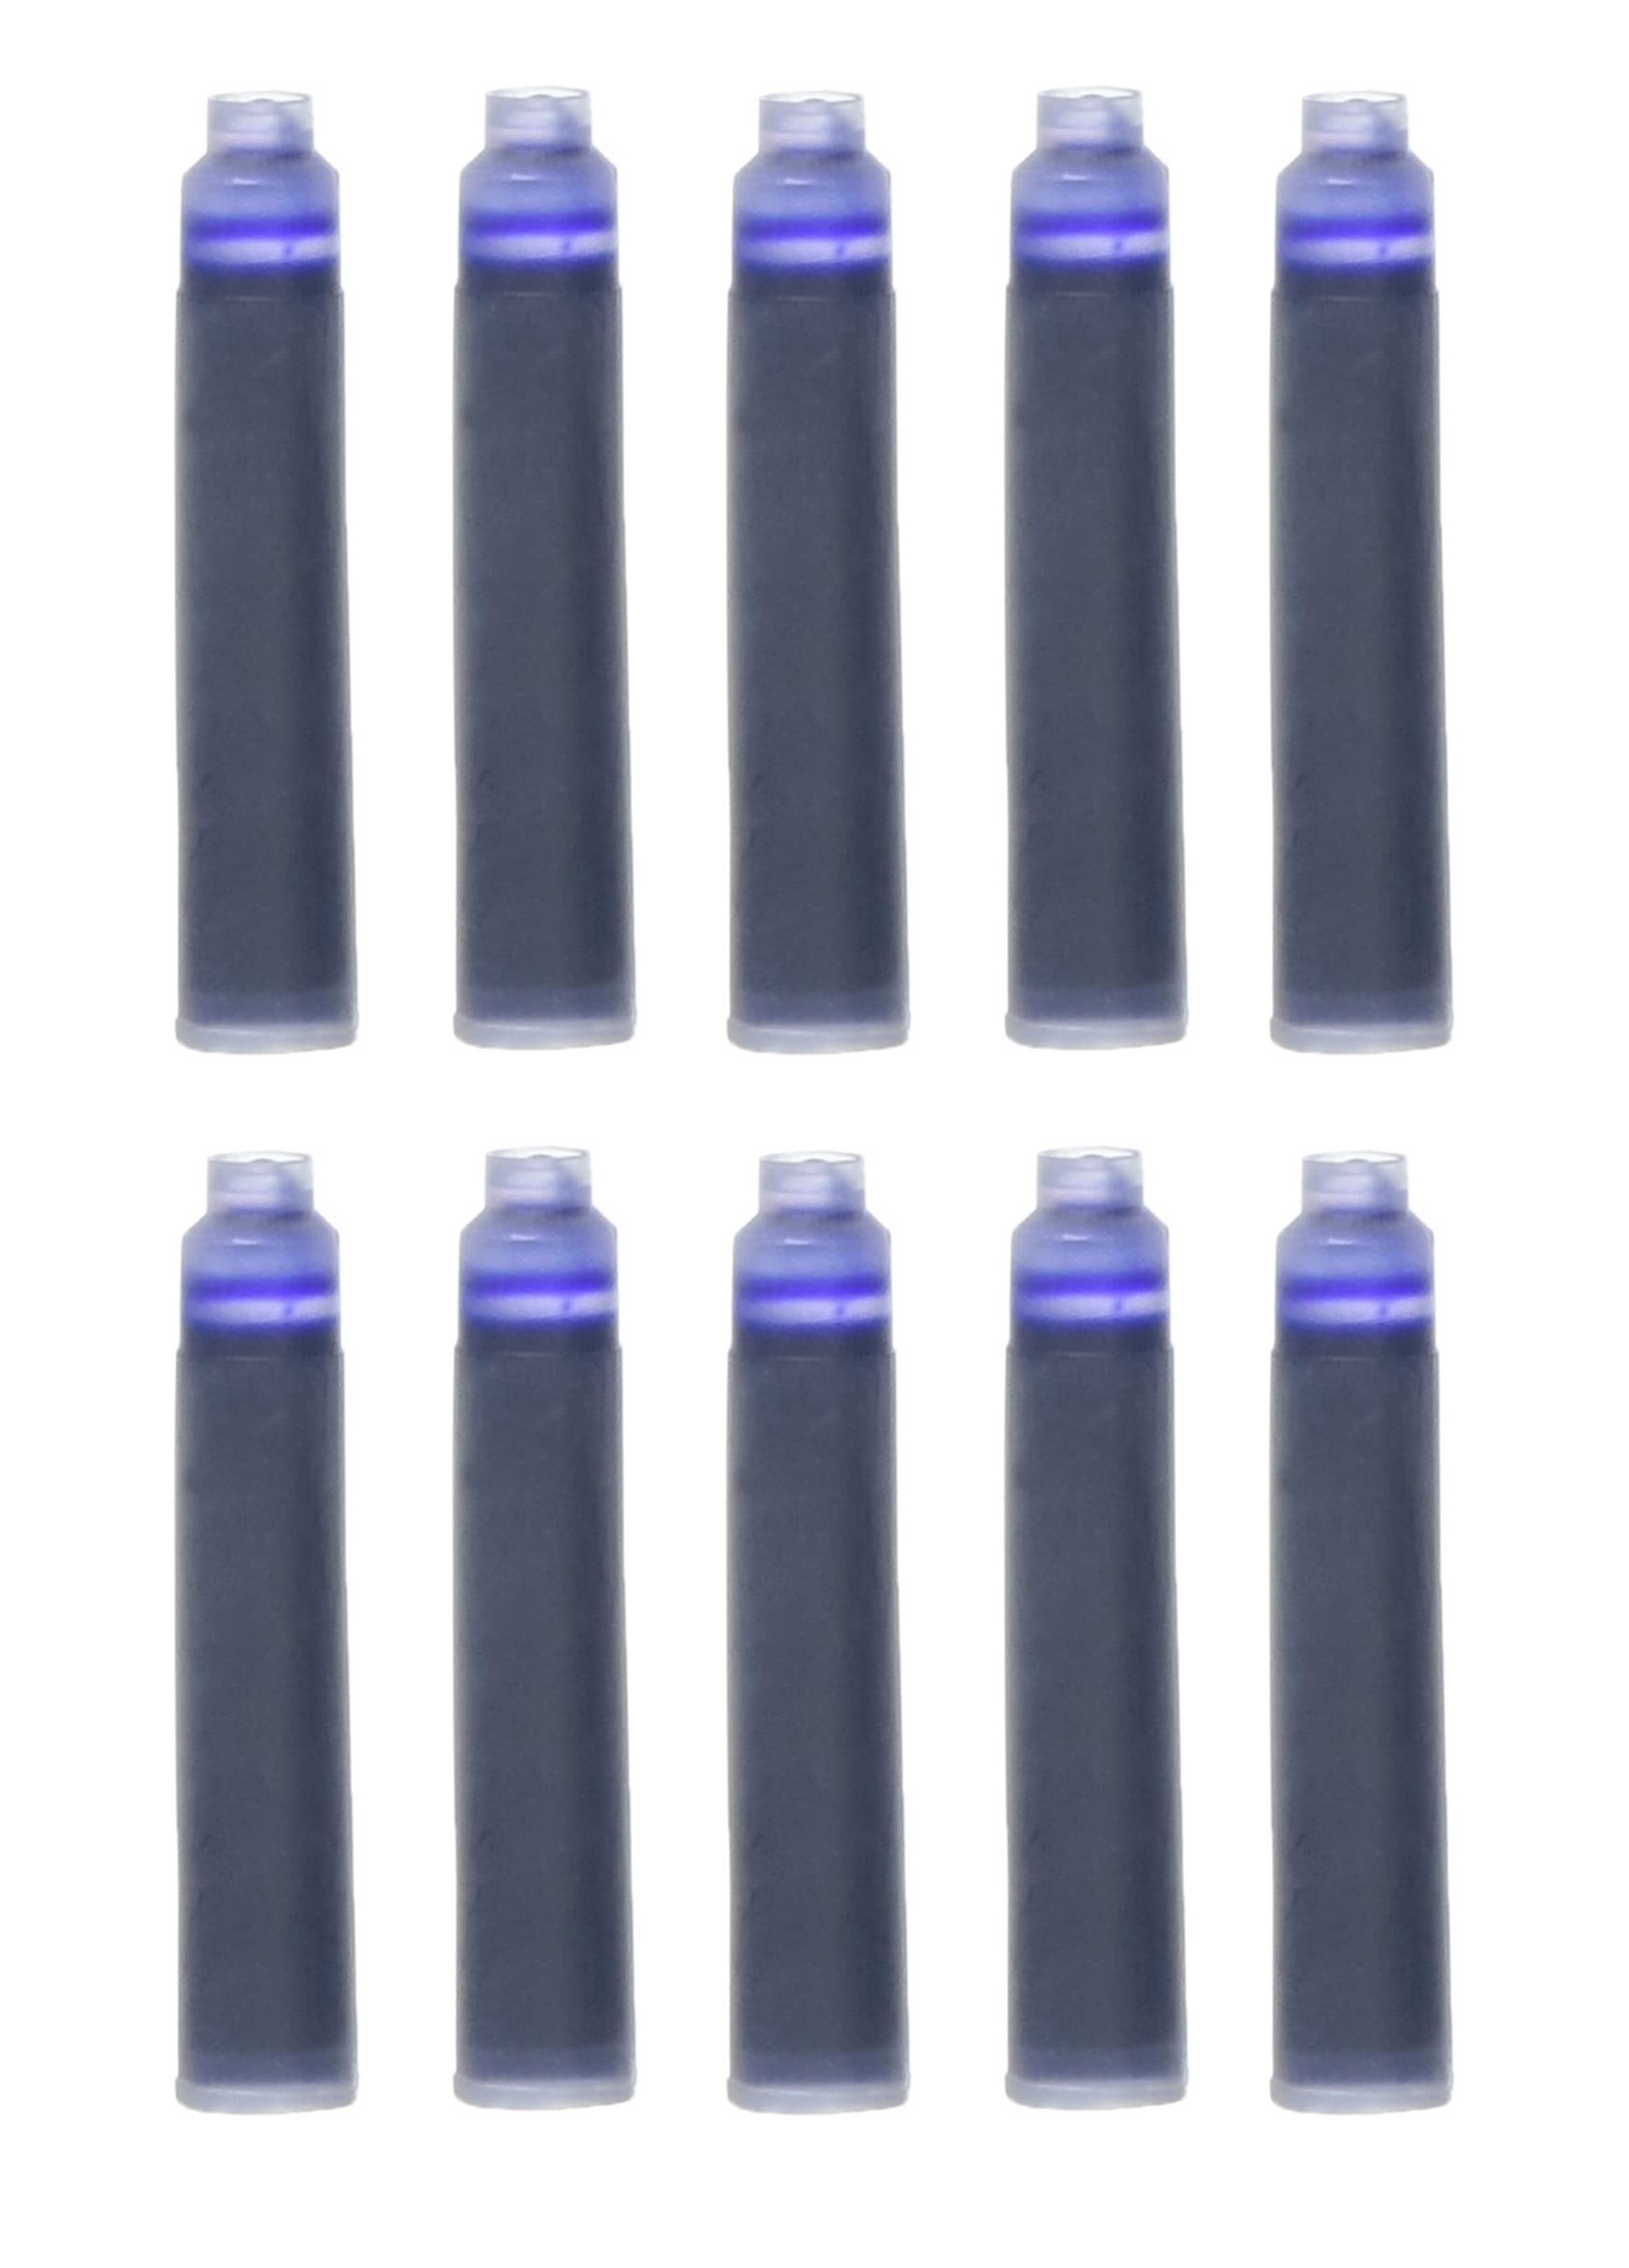 Xezo - Image of 10 ink cartridges of the Xezo International Standard Size Blue Ink Cartridges for Fountain Pens. 10 Per Pack. Blue Ink.